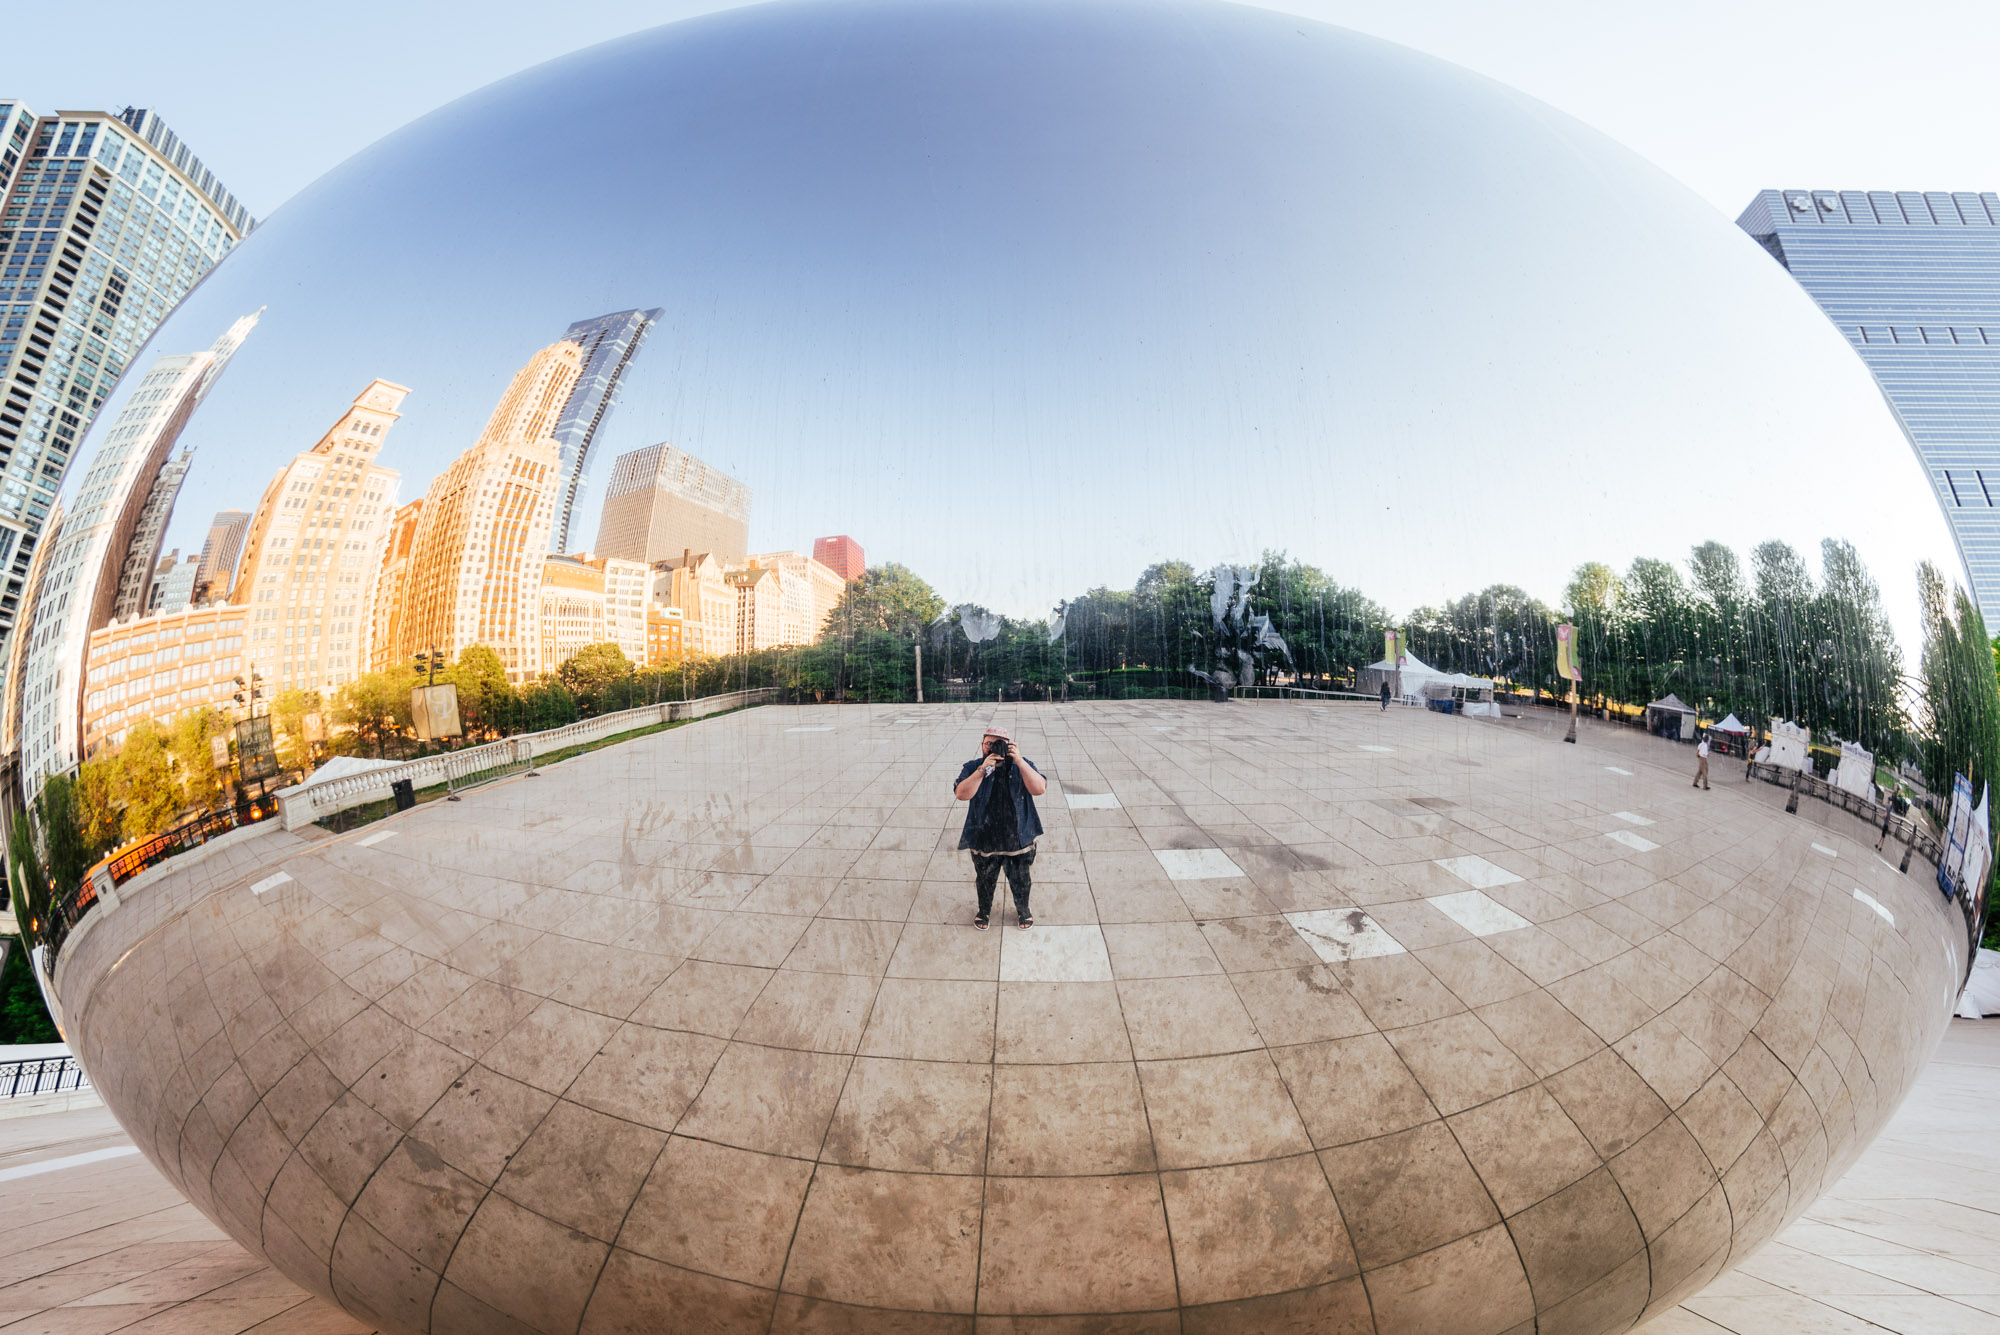 Jeff On The Road - Travel - Chicago - Millenium Park - Cloud Gate by Anish Kapoor - All photos are under Copyright © 2017 Jeff Frenette Photography / dezjeff. To use the photos, please contact me at dezjeff@me.com.